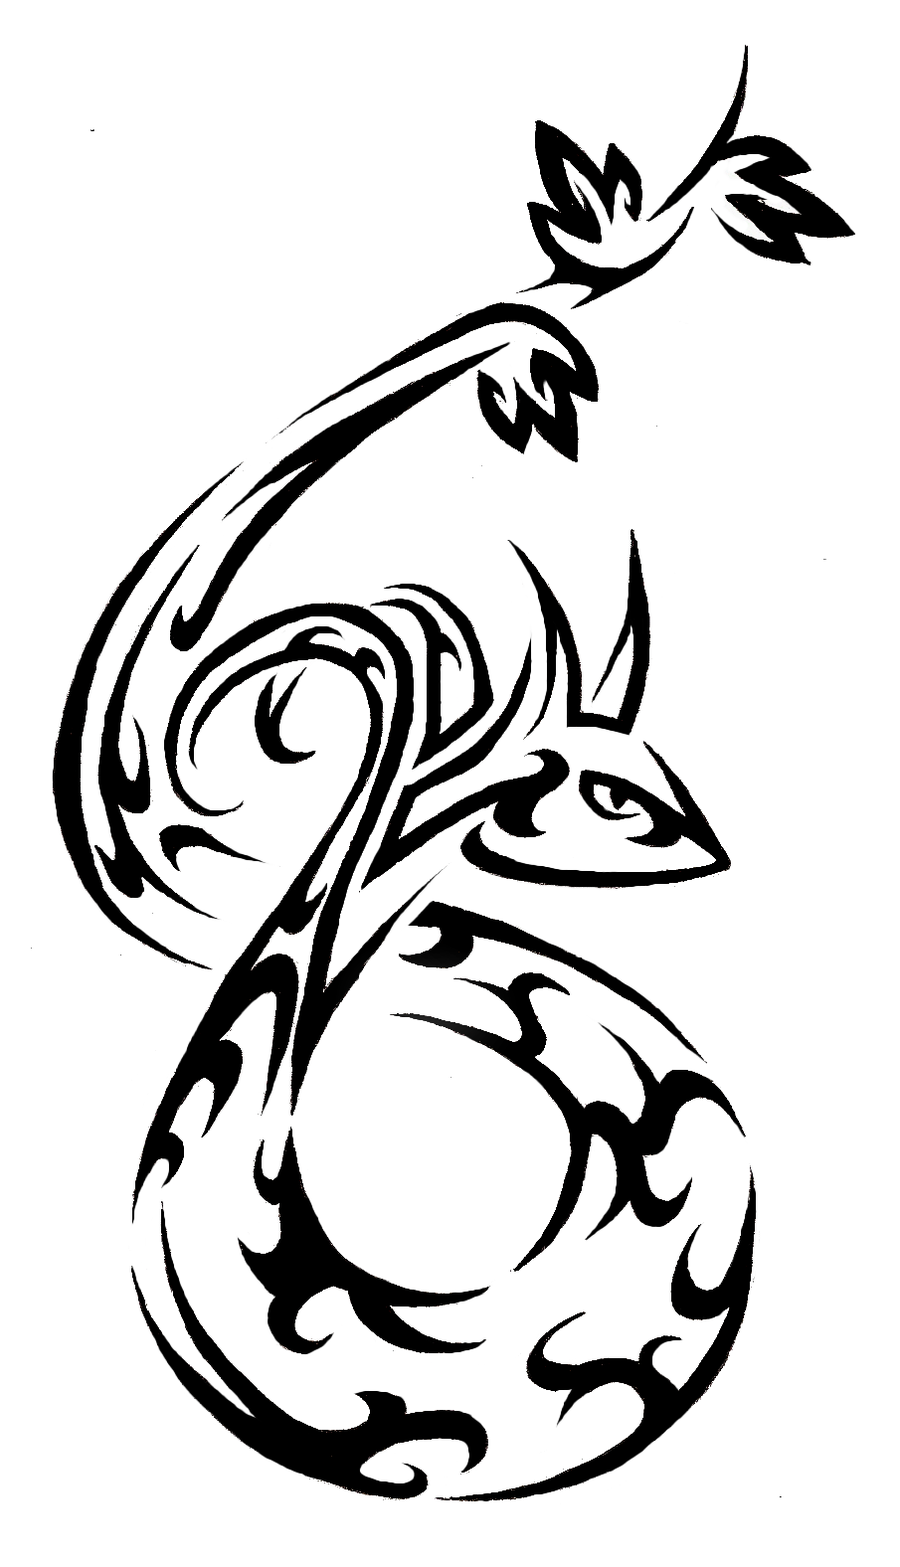 deviantART: More Like Tribal Absol Tattoo by - ClipArt Best - ClipArt Best